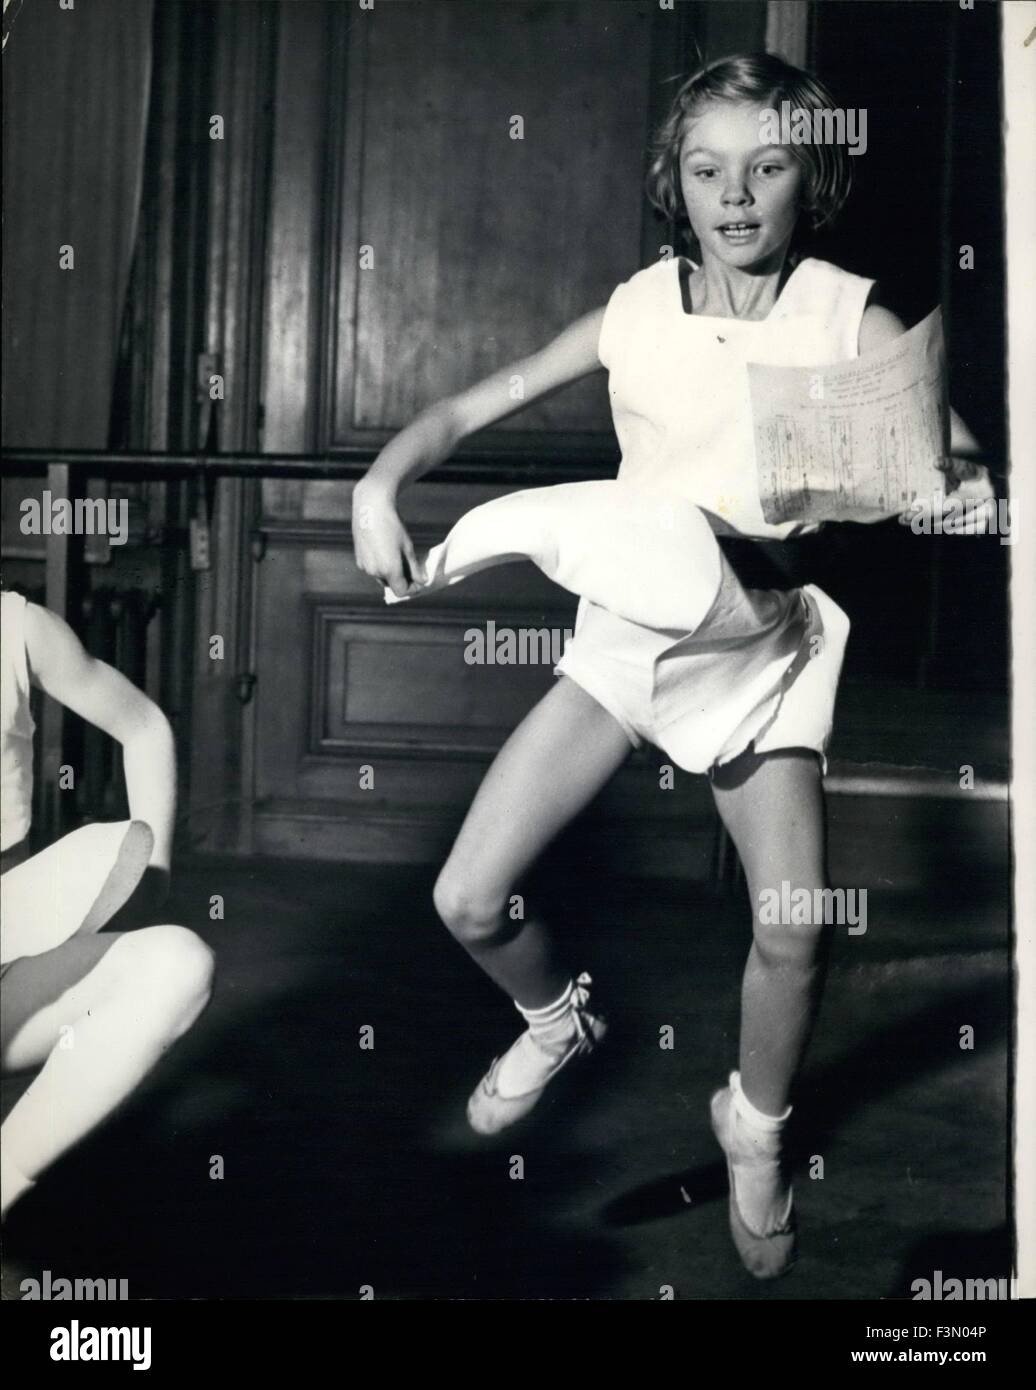 Feb. 24, 1962 - She's Learning To Dance The Easy Way: Christine Shand reads her dance steps from the paper in front of her. © Keystone Pictures USA/ZUMAPRESS.com/Alamy Live News Stock Photo